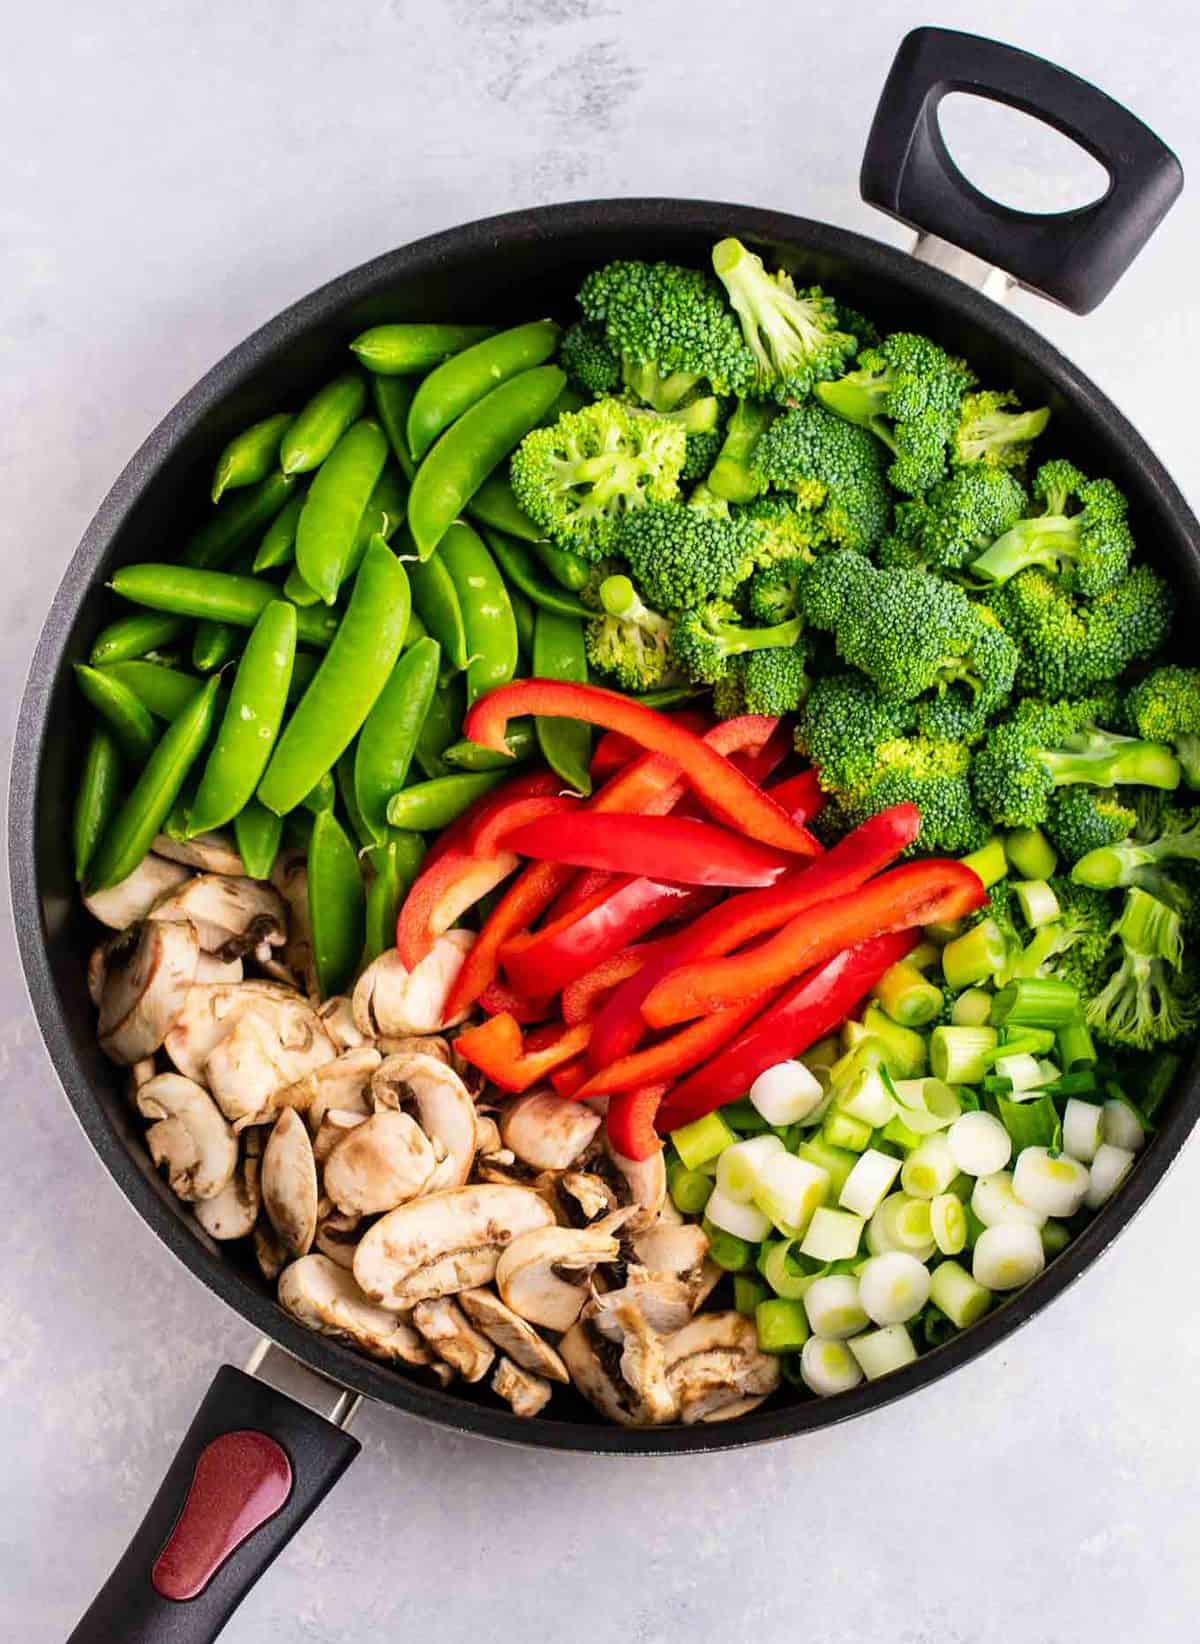 a skillet with stir fry veggies - snap peas, broccoli, red bell pepper, green onion, and sliced mushrooms